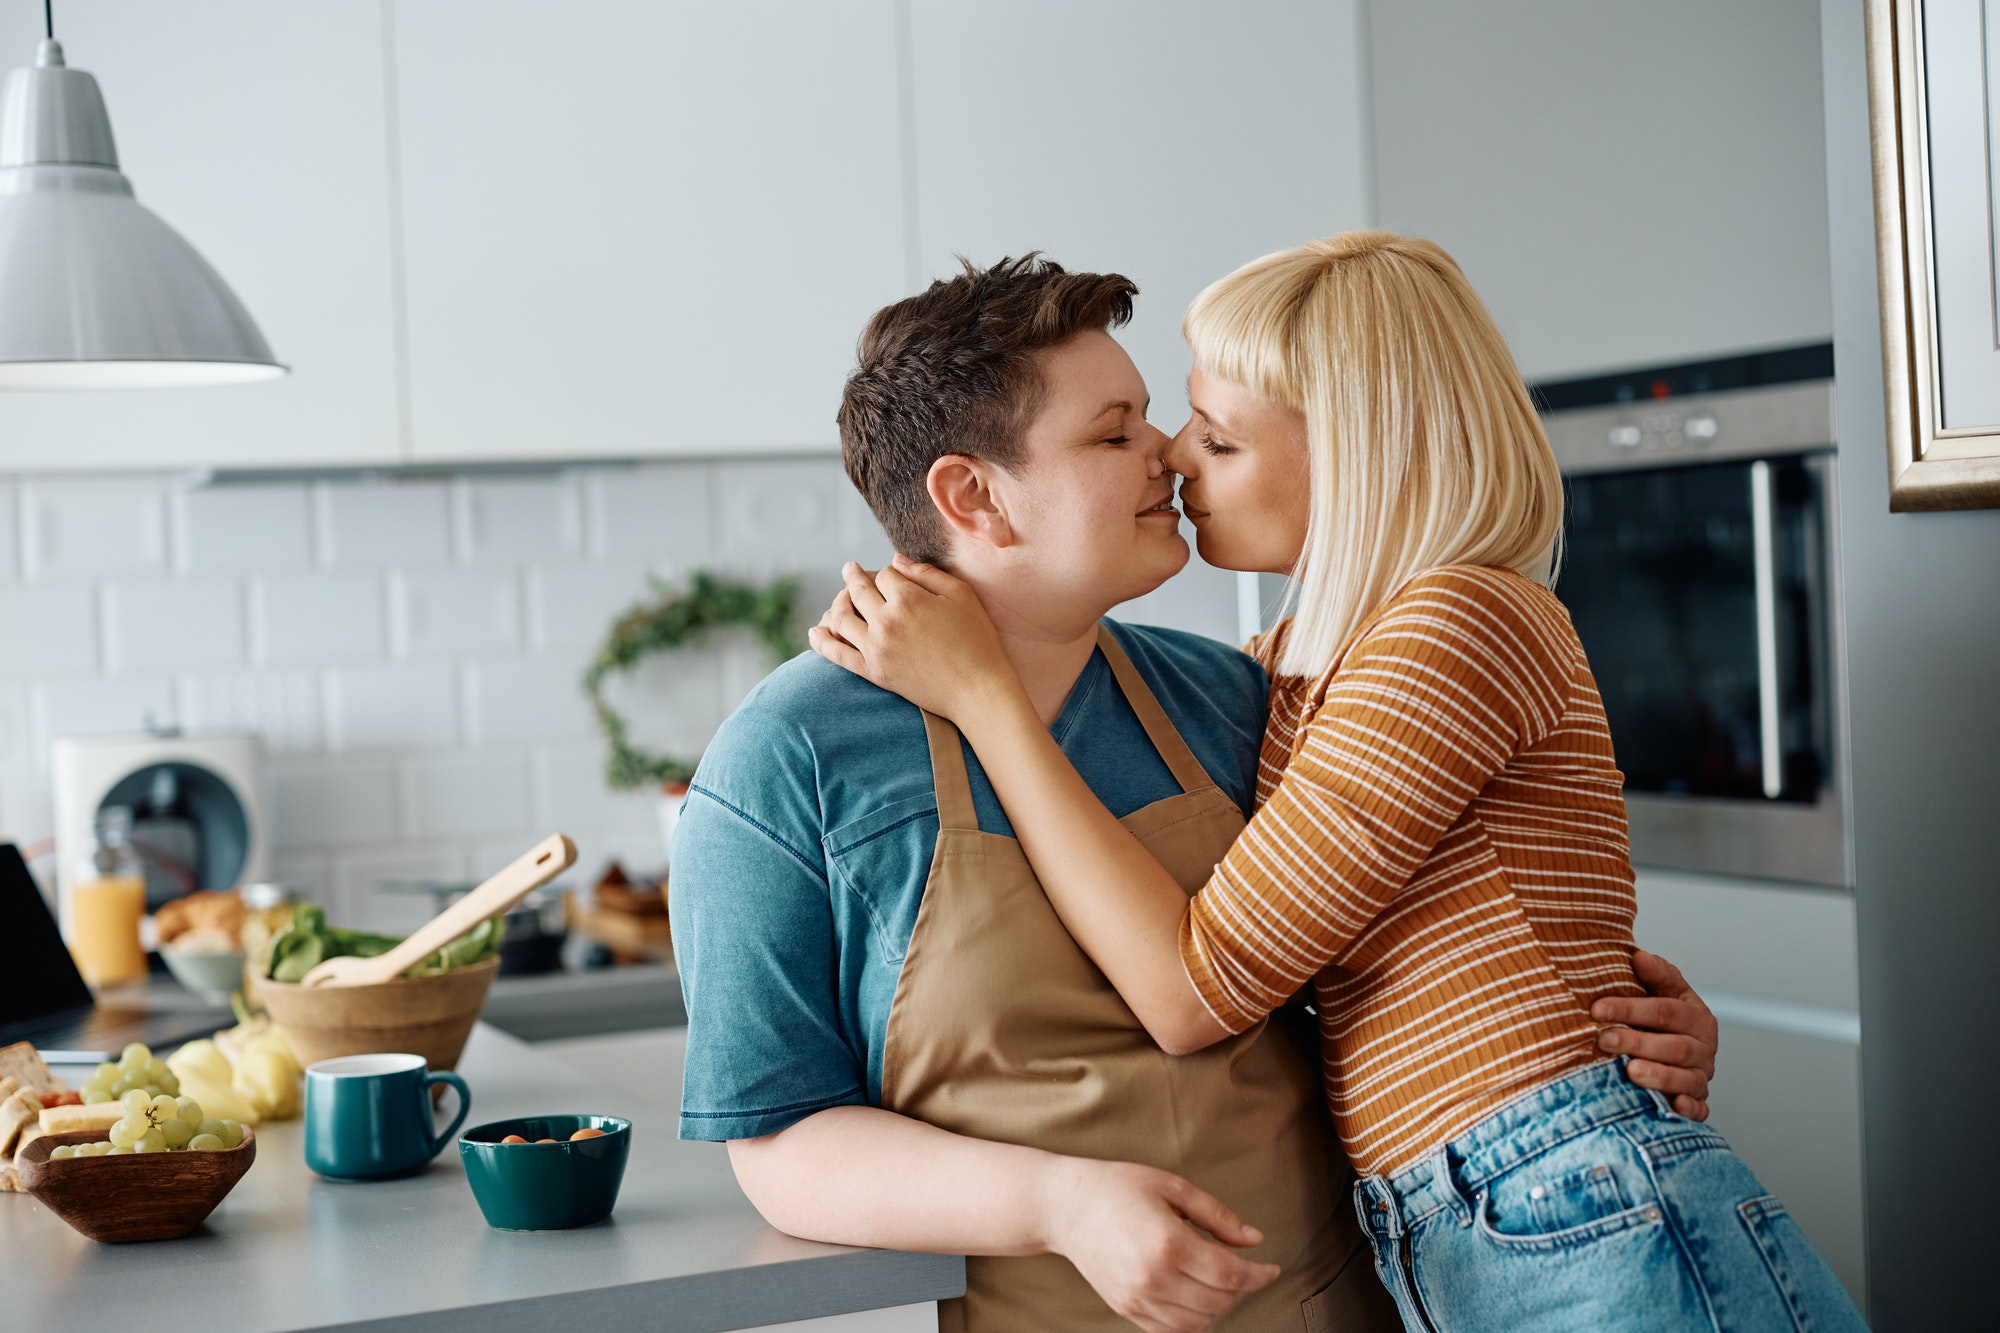 Affectionate lesbian couple kissing in the kitchen.